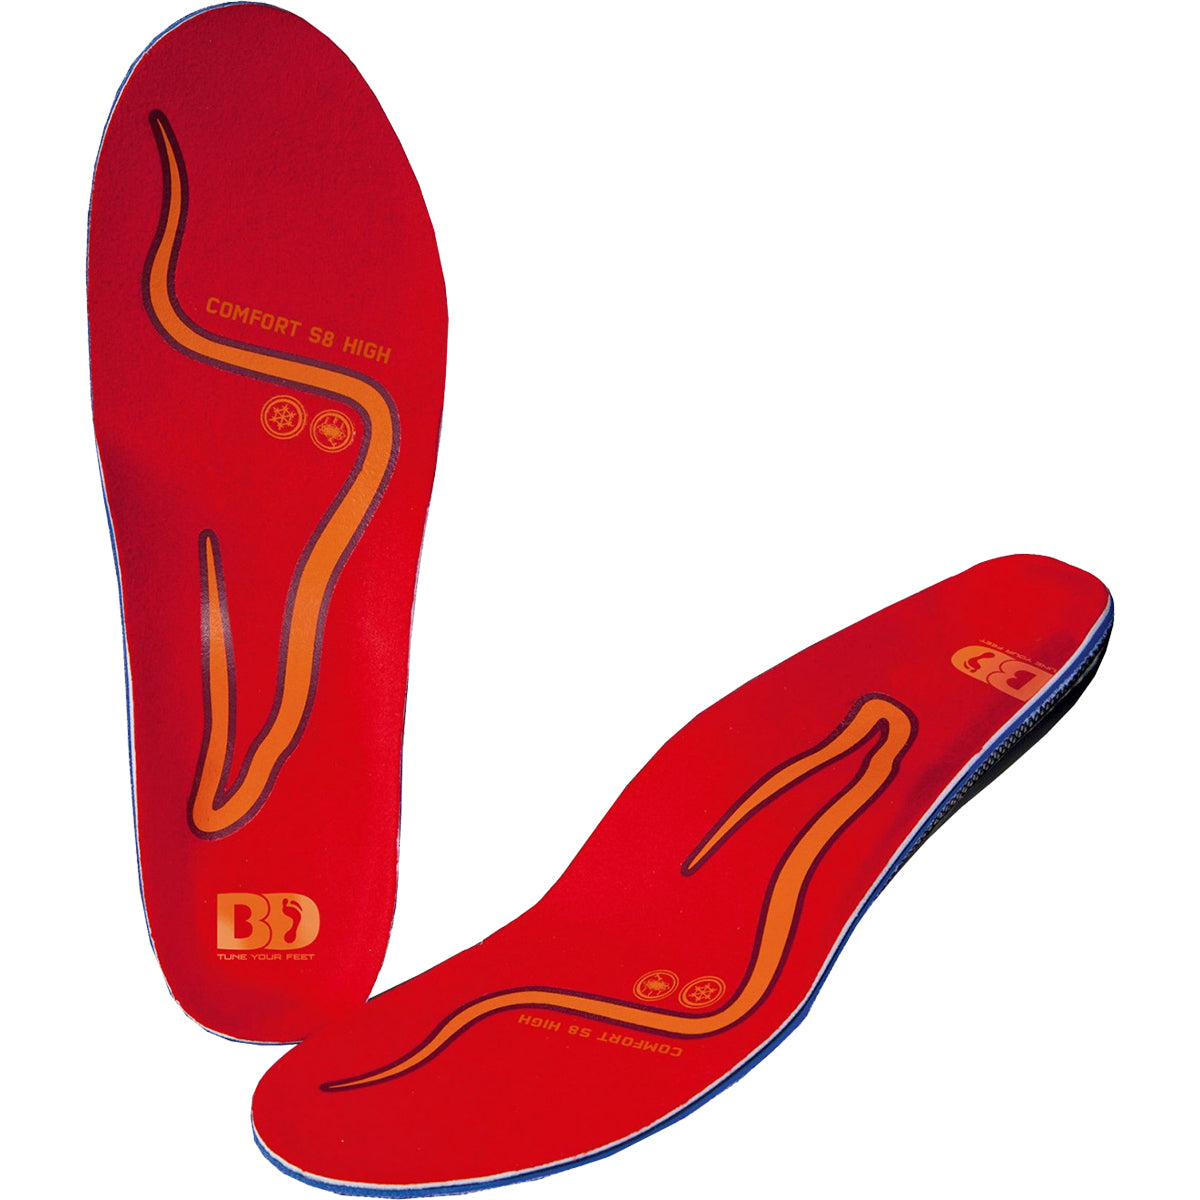 BootDoc Comfort S8 High Insole